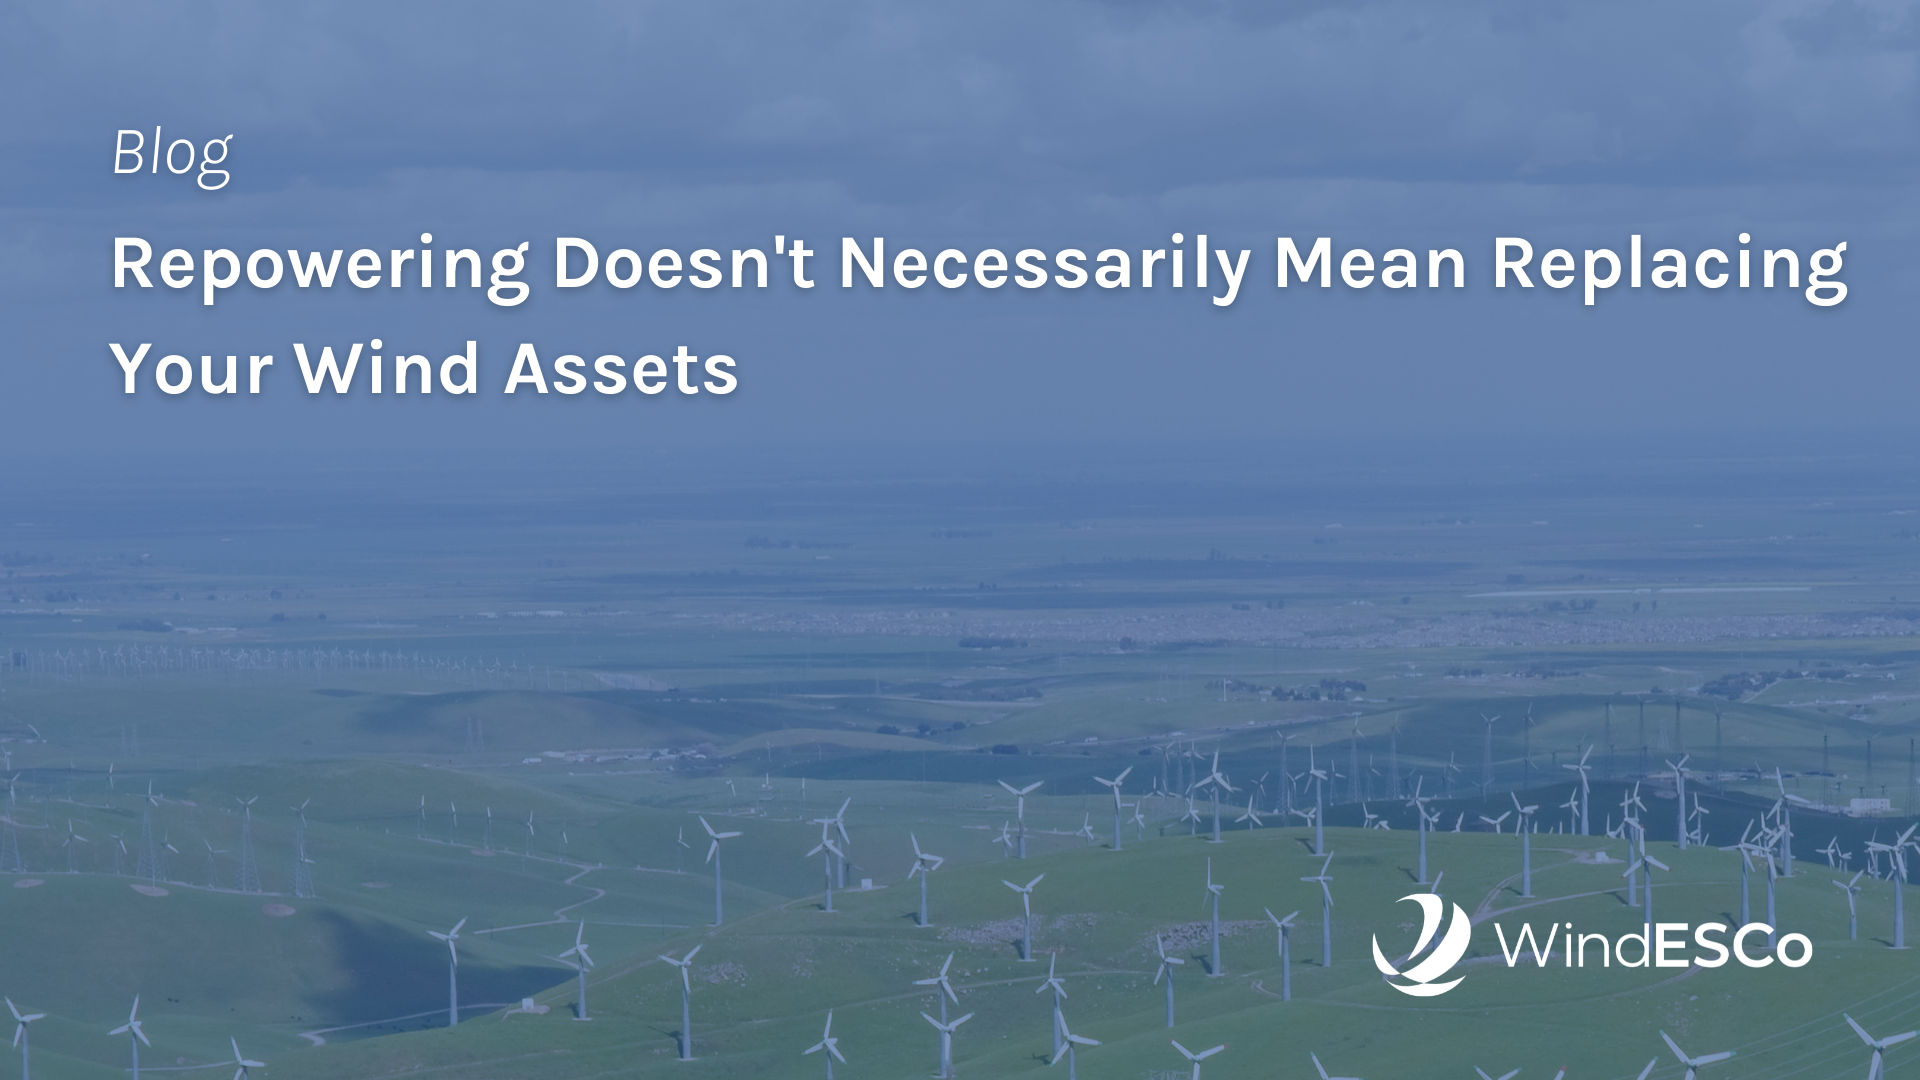 Repowering Wind Assets Without Rebuilding Farms